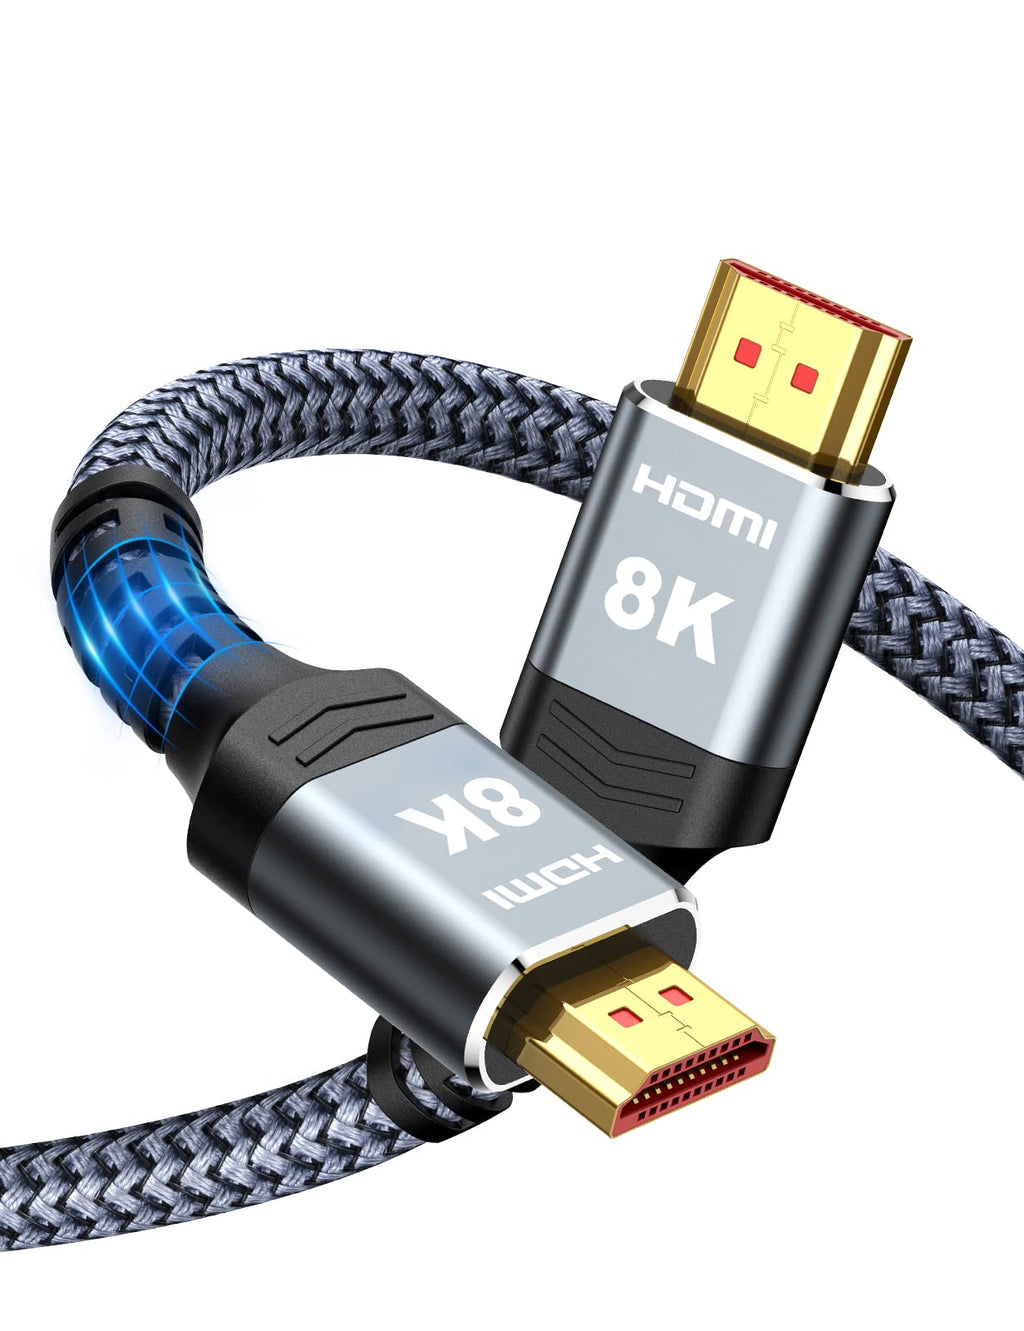  [AUSTRALIA] - Highwings 8K HDMI Cable 2.1 48Gbps 6.6FT/2M, High Speed HDMI Braided Cord-4K@120Hz 8K@60Hz, DTS:X, HDCP 2.2 & 2.3, HDR 10 Compatible with Roku TV/PS5/HDTV/Blu-ray 6.6 feet Grey